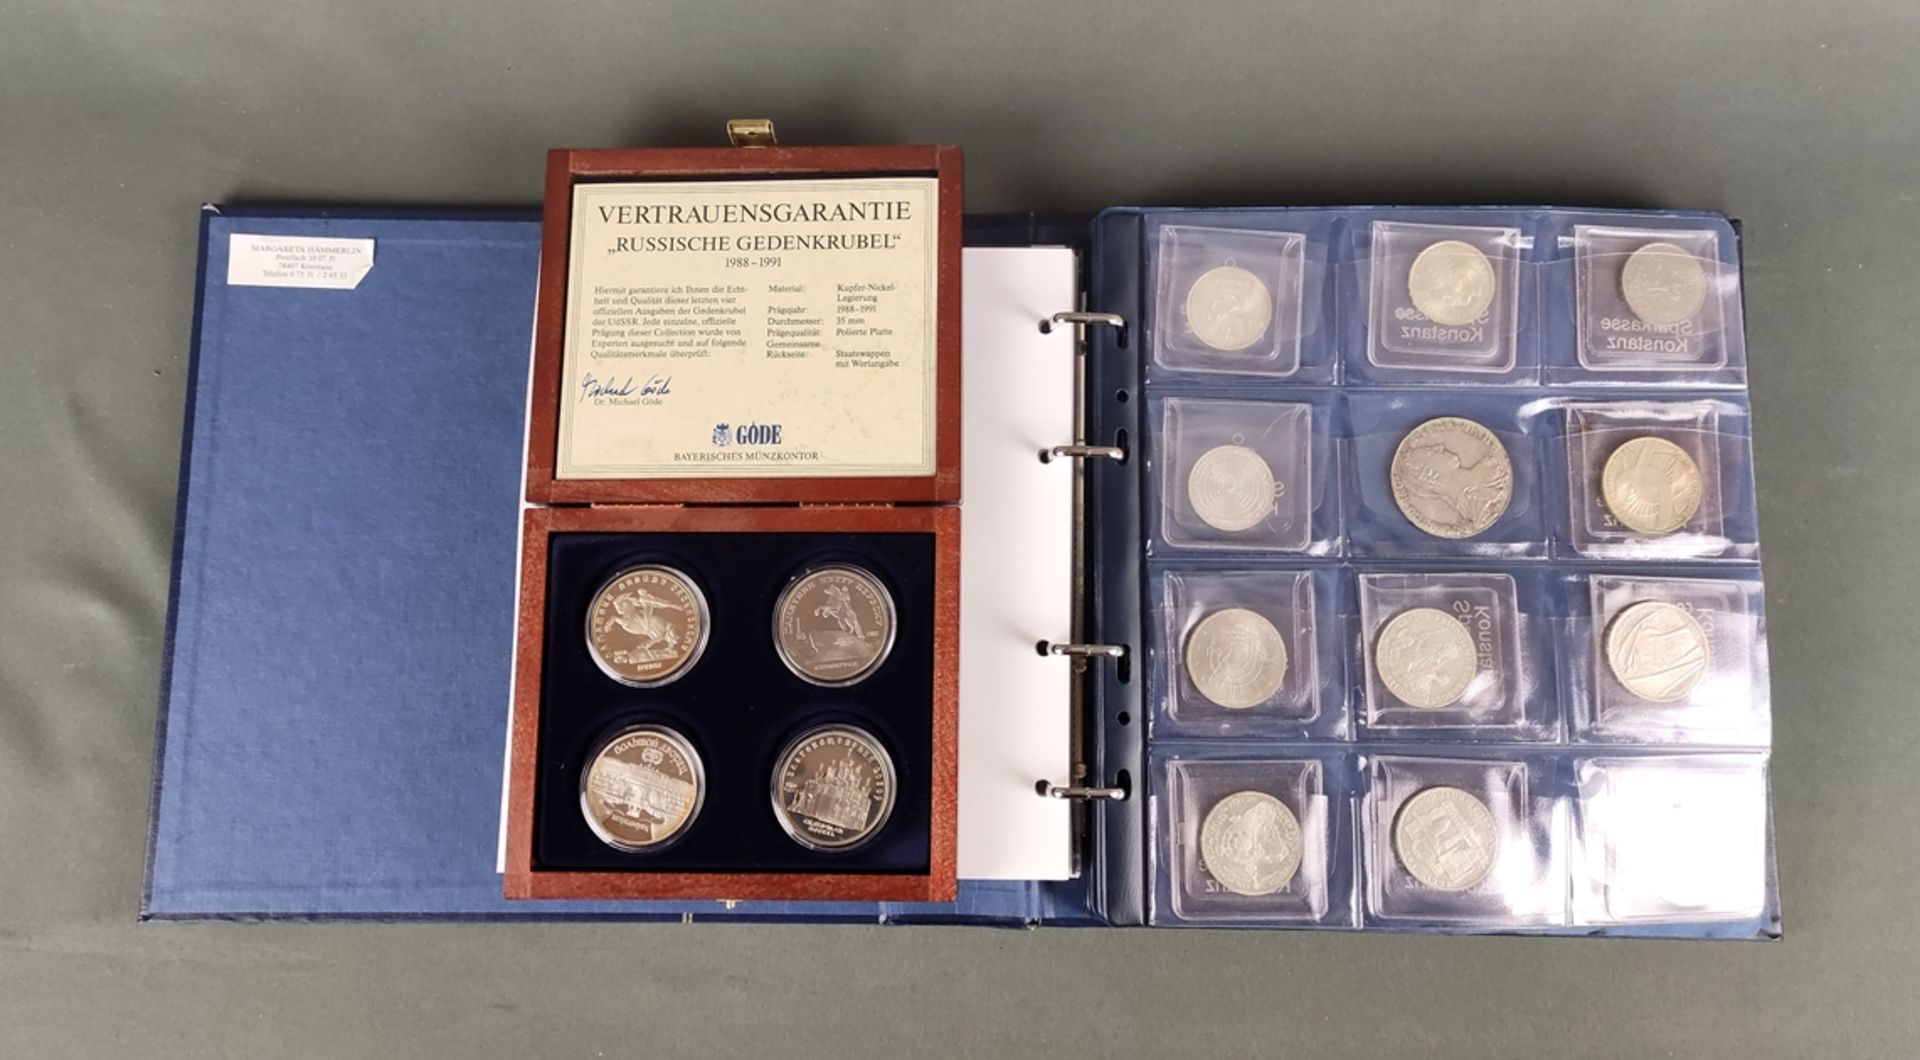 Large extensive coin and medal collection, consisting among other things of wooden box Gode "Die sc - Image 2 of 3